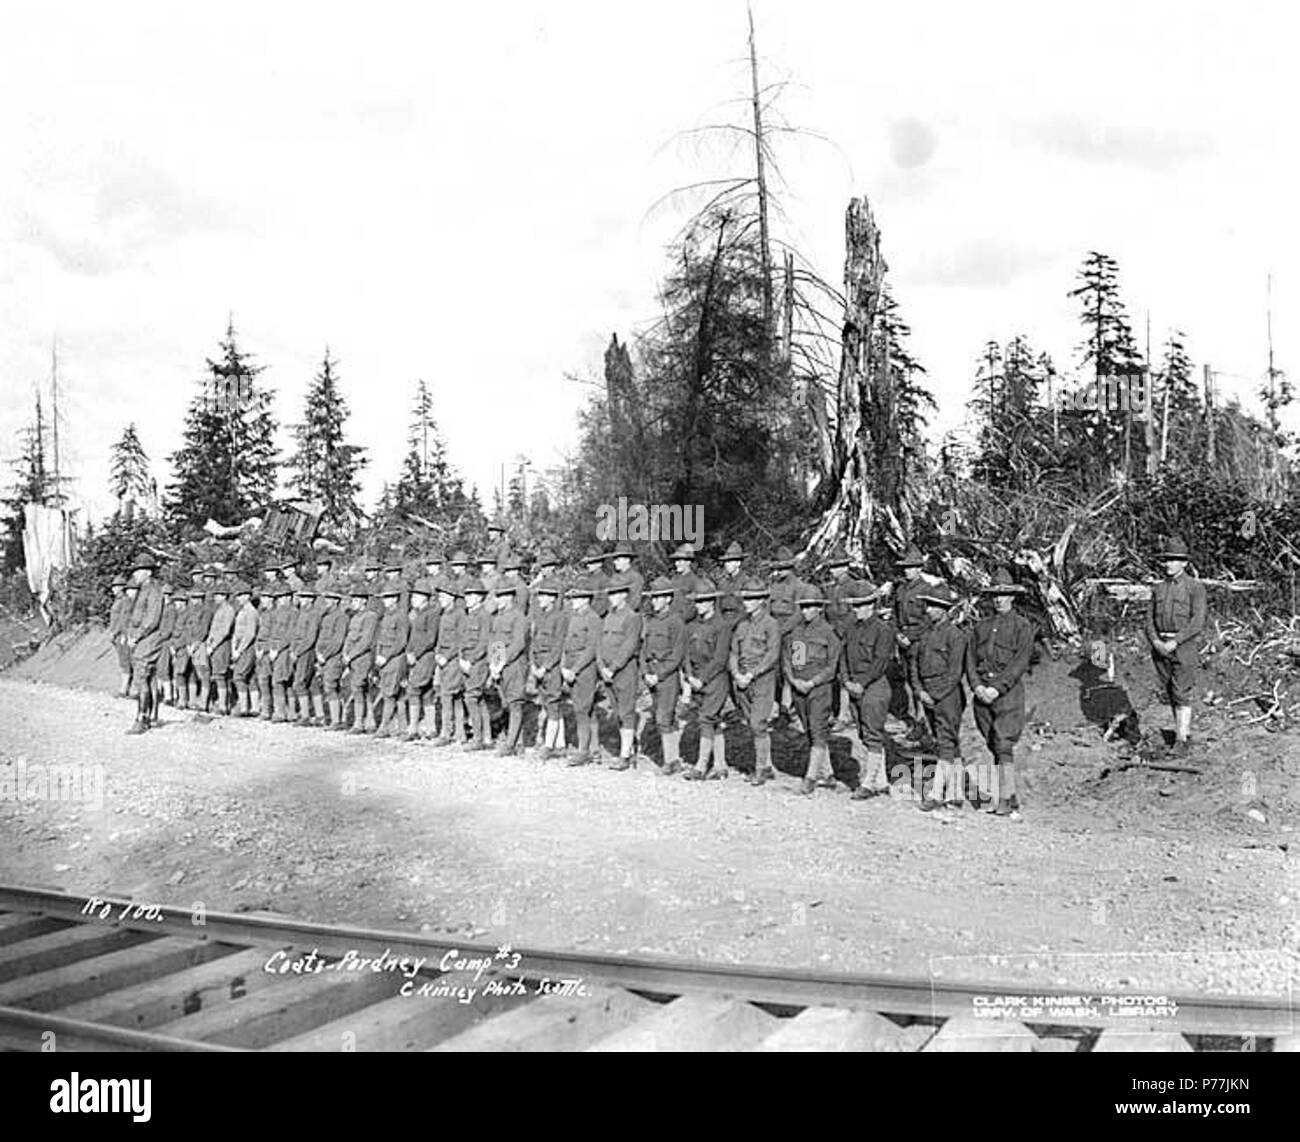 . English: Spruce Division soldiers at Coats-Fordney Lumber company camp no. 3, ca. 1918 . English: Caption on image: Coats-Fordney Camp No. 3. C. Kinsey Photo, Seattle. No. 100 PH Coll 516.4599 The Coats-Fordney Lumber Company started out as the A.F. Coats Lumber Company in 1905, headquartered in Aberdeen. It became the Coats-Fordney Lumber Company in 1910, and by 1924, it was called the Donovan-Corkery Lumber Company. Subjects (LCTGM): Soldiers--Washington (State); Railroad tracks--Washington (State); Lumber camps--Washington (State); United States. Army. Spruce Division--People--Washington  Stock Photo